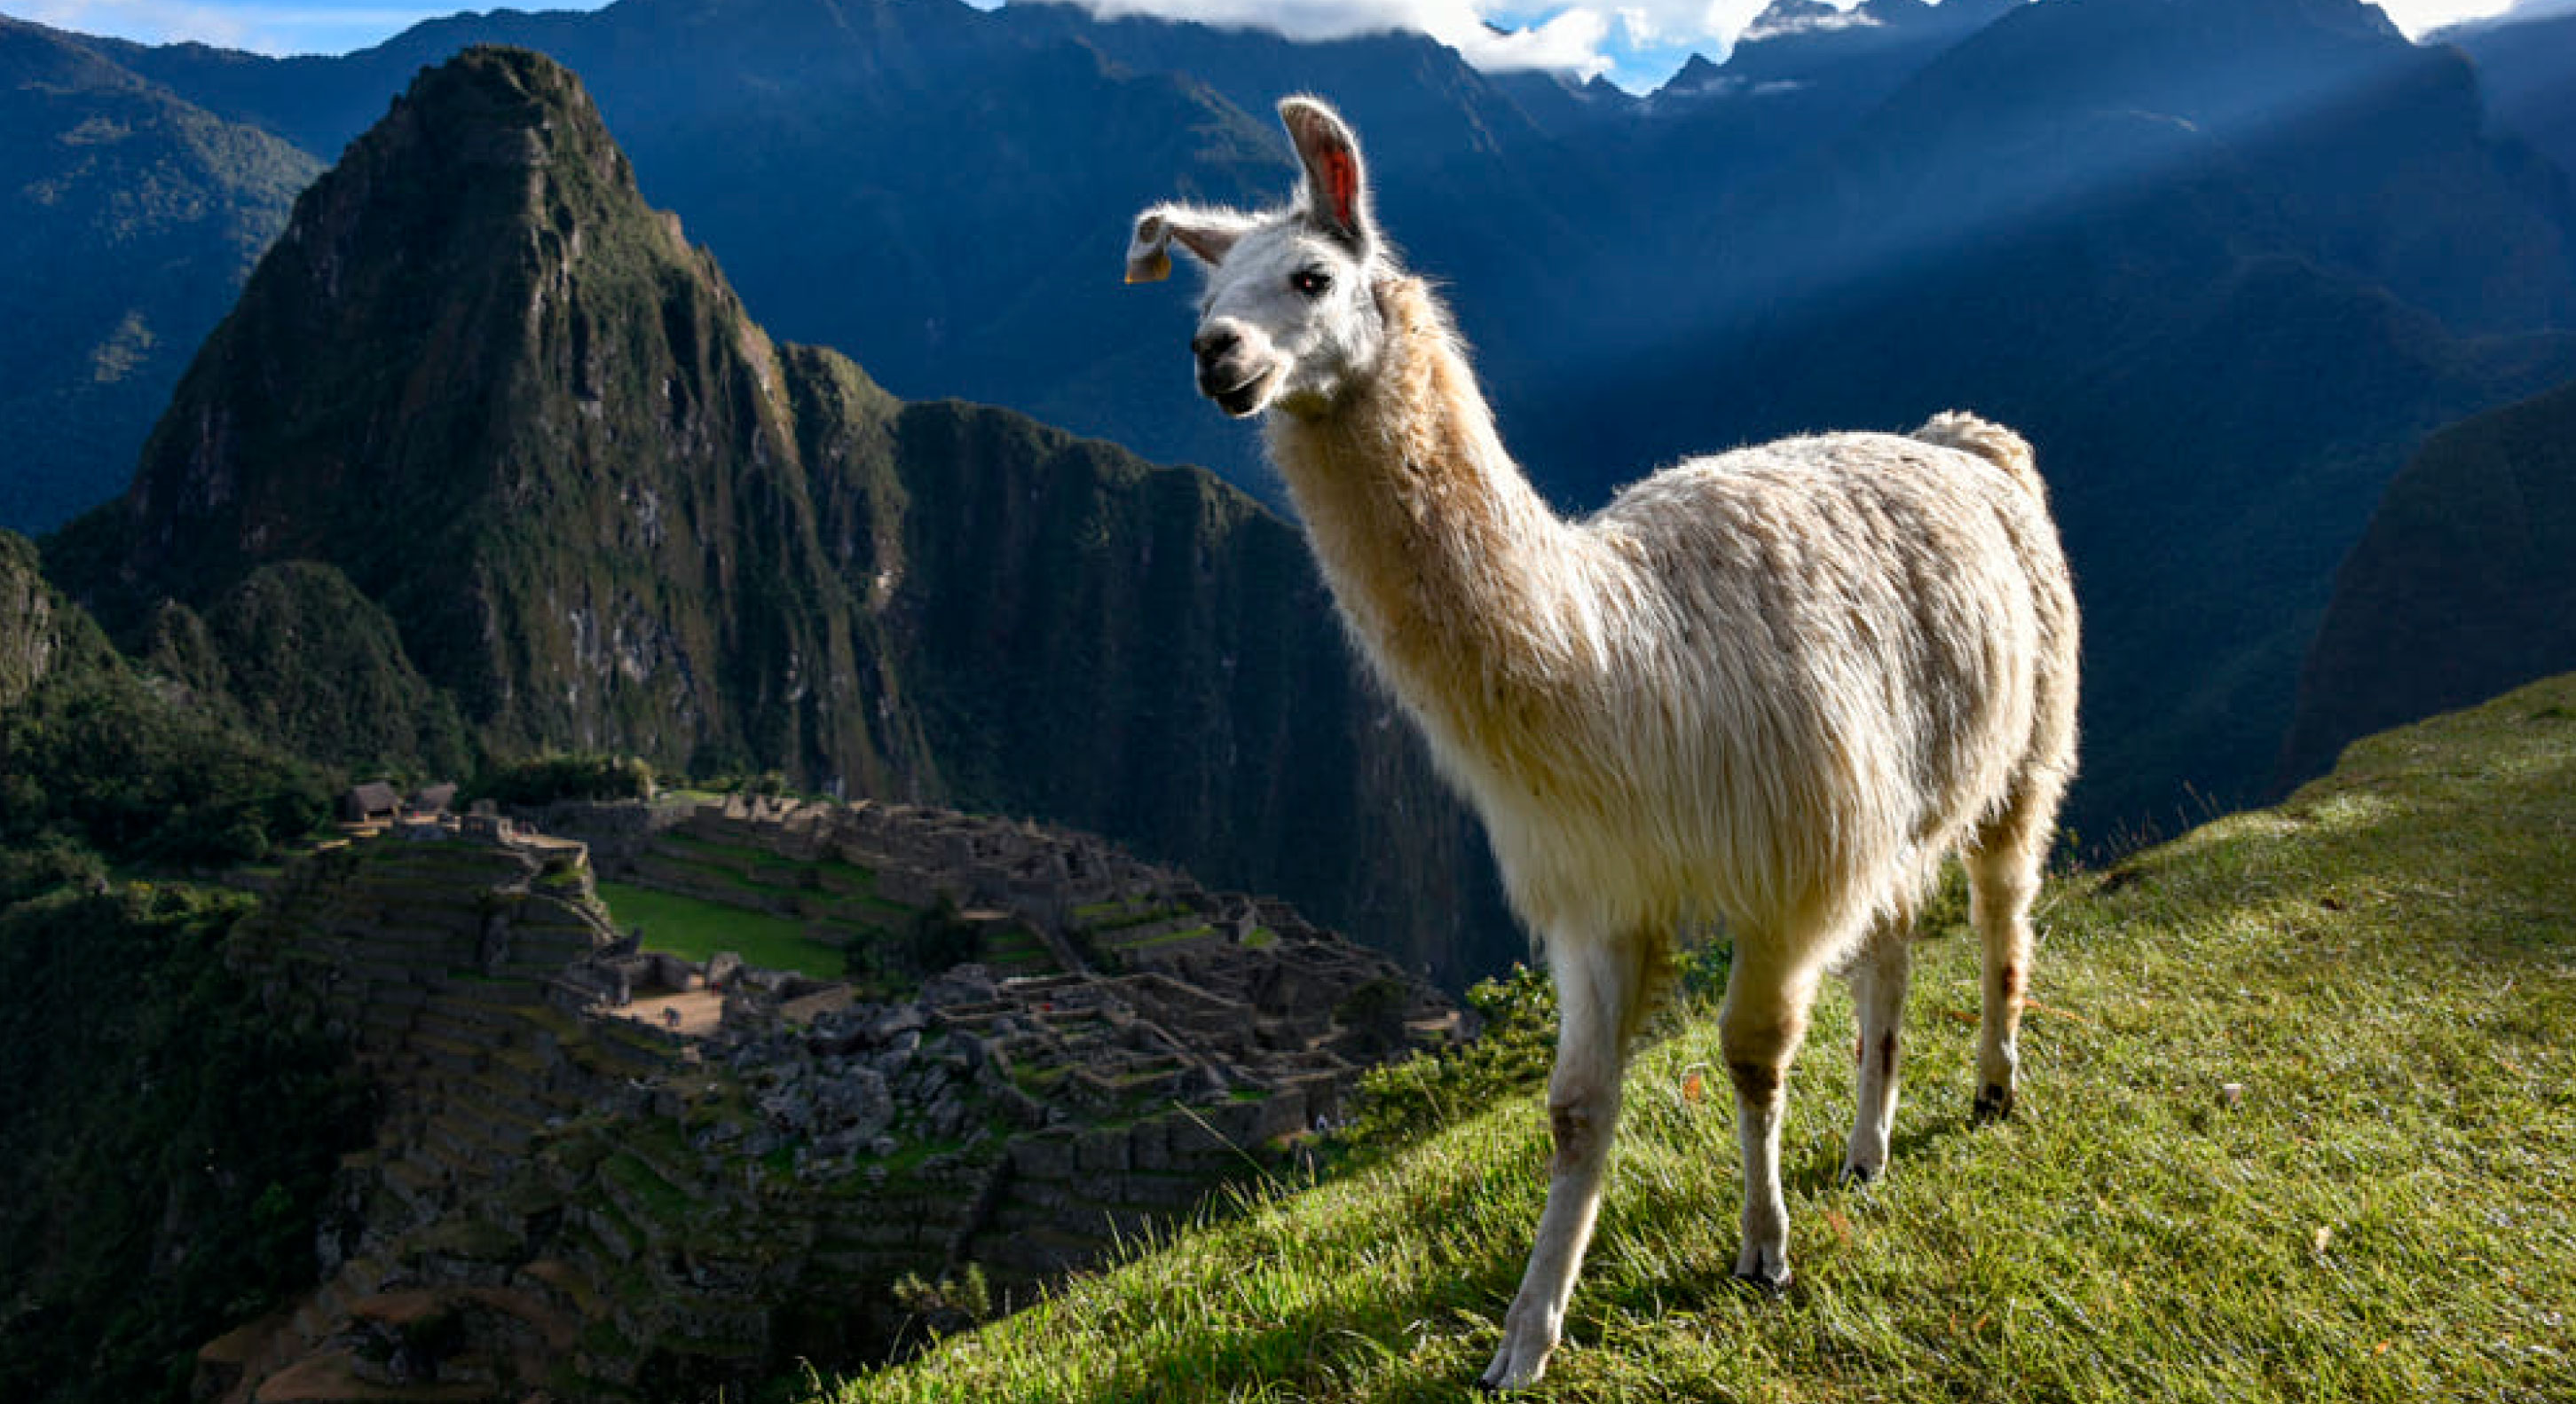 Some of the many reasons to go up to Huayna Picchu